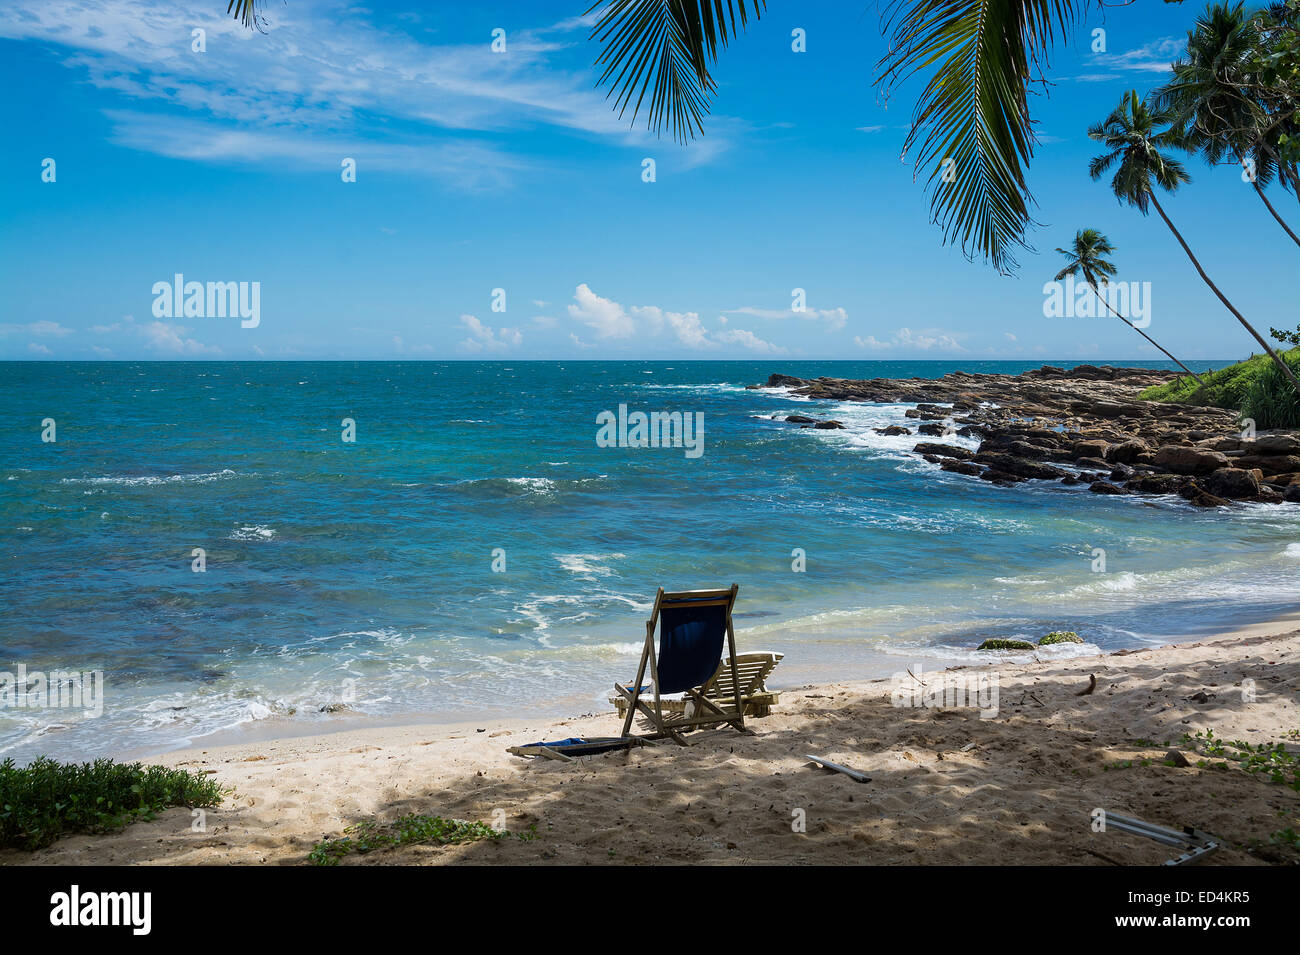 Tropical rocky beach with coconut palm trees, sandy beach and ocean. Tangalle, Southern Province, Sri Lanka, Asia. Stock Photo